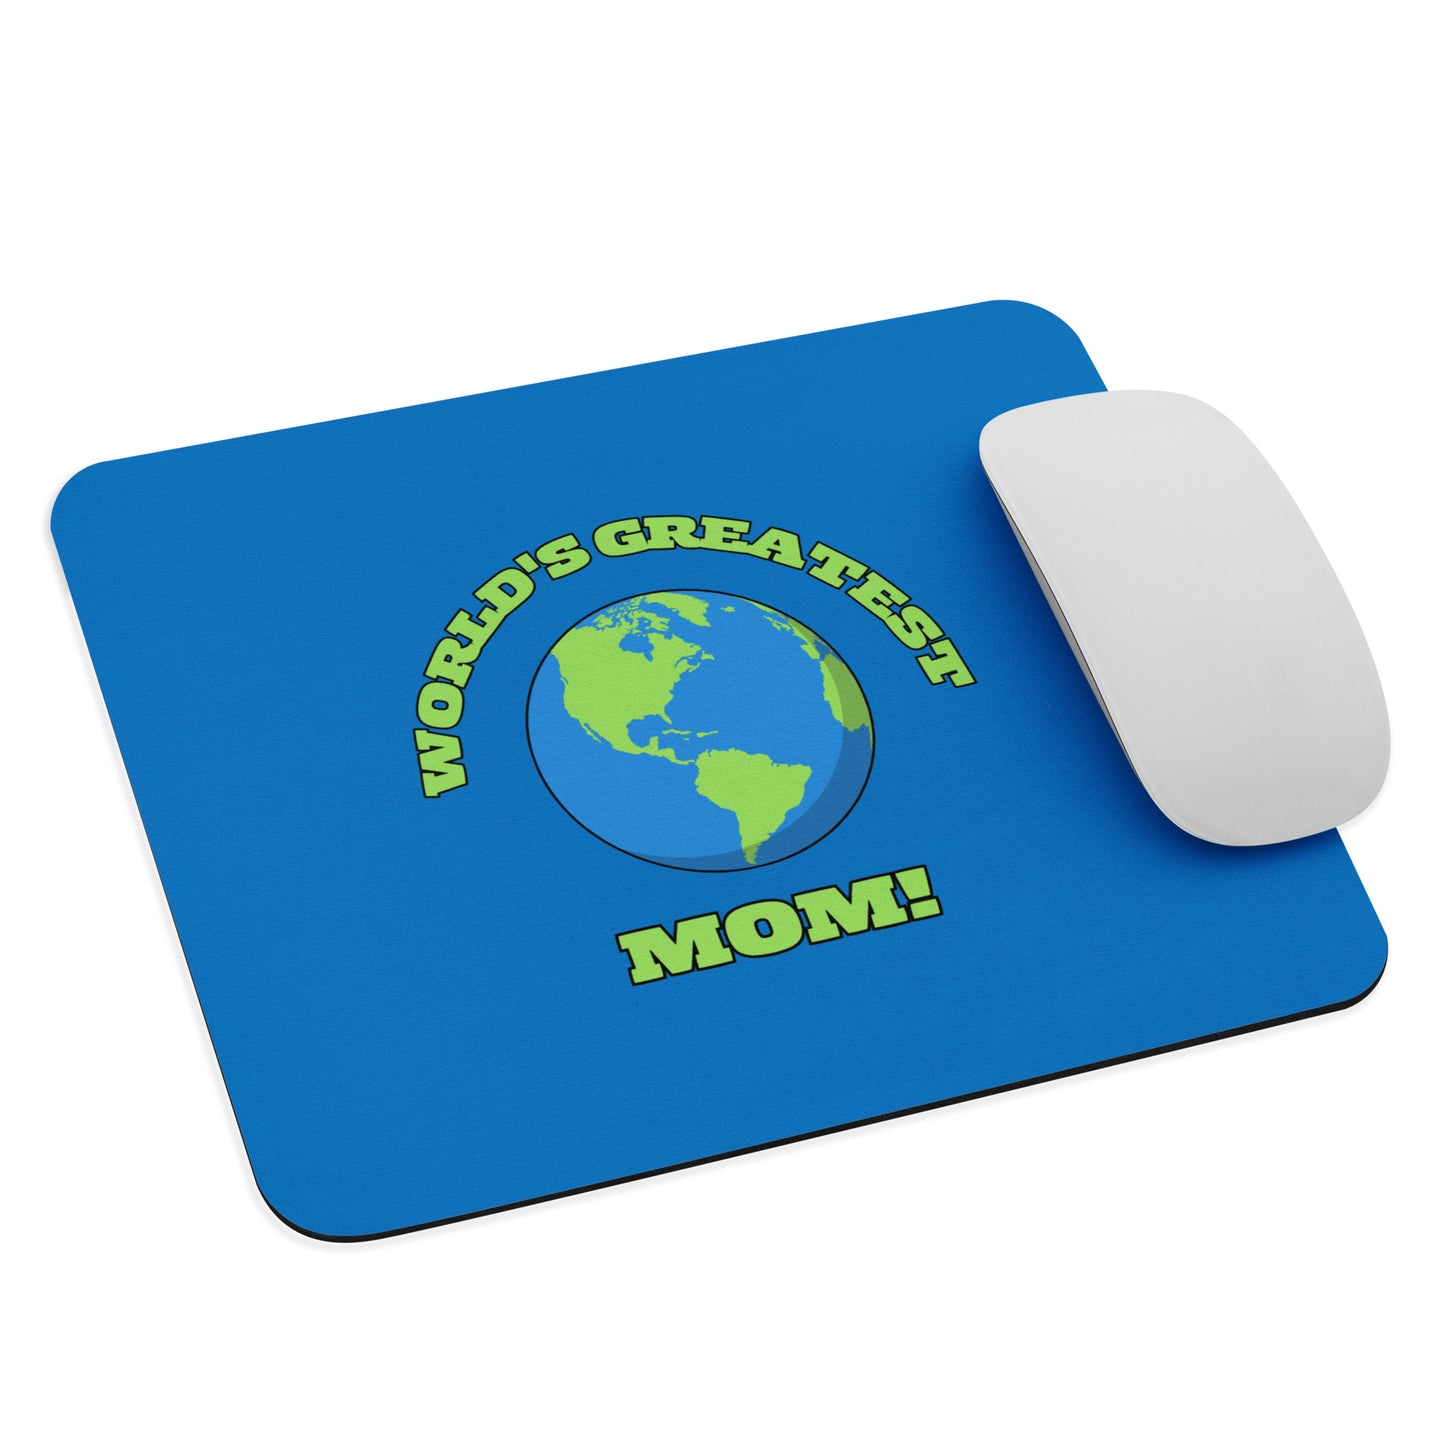 World's Greatest Mom - Mouse Pad